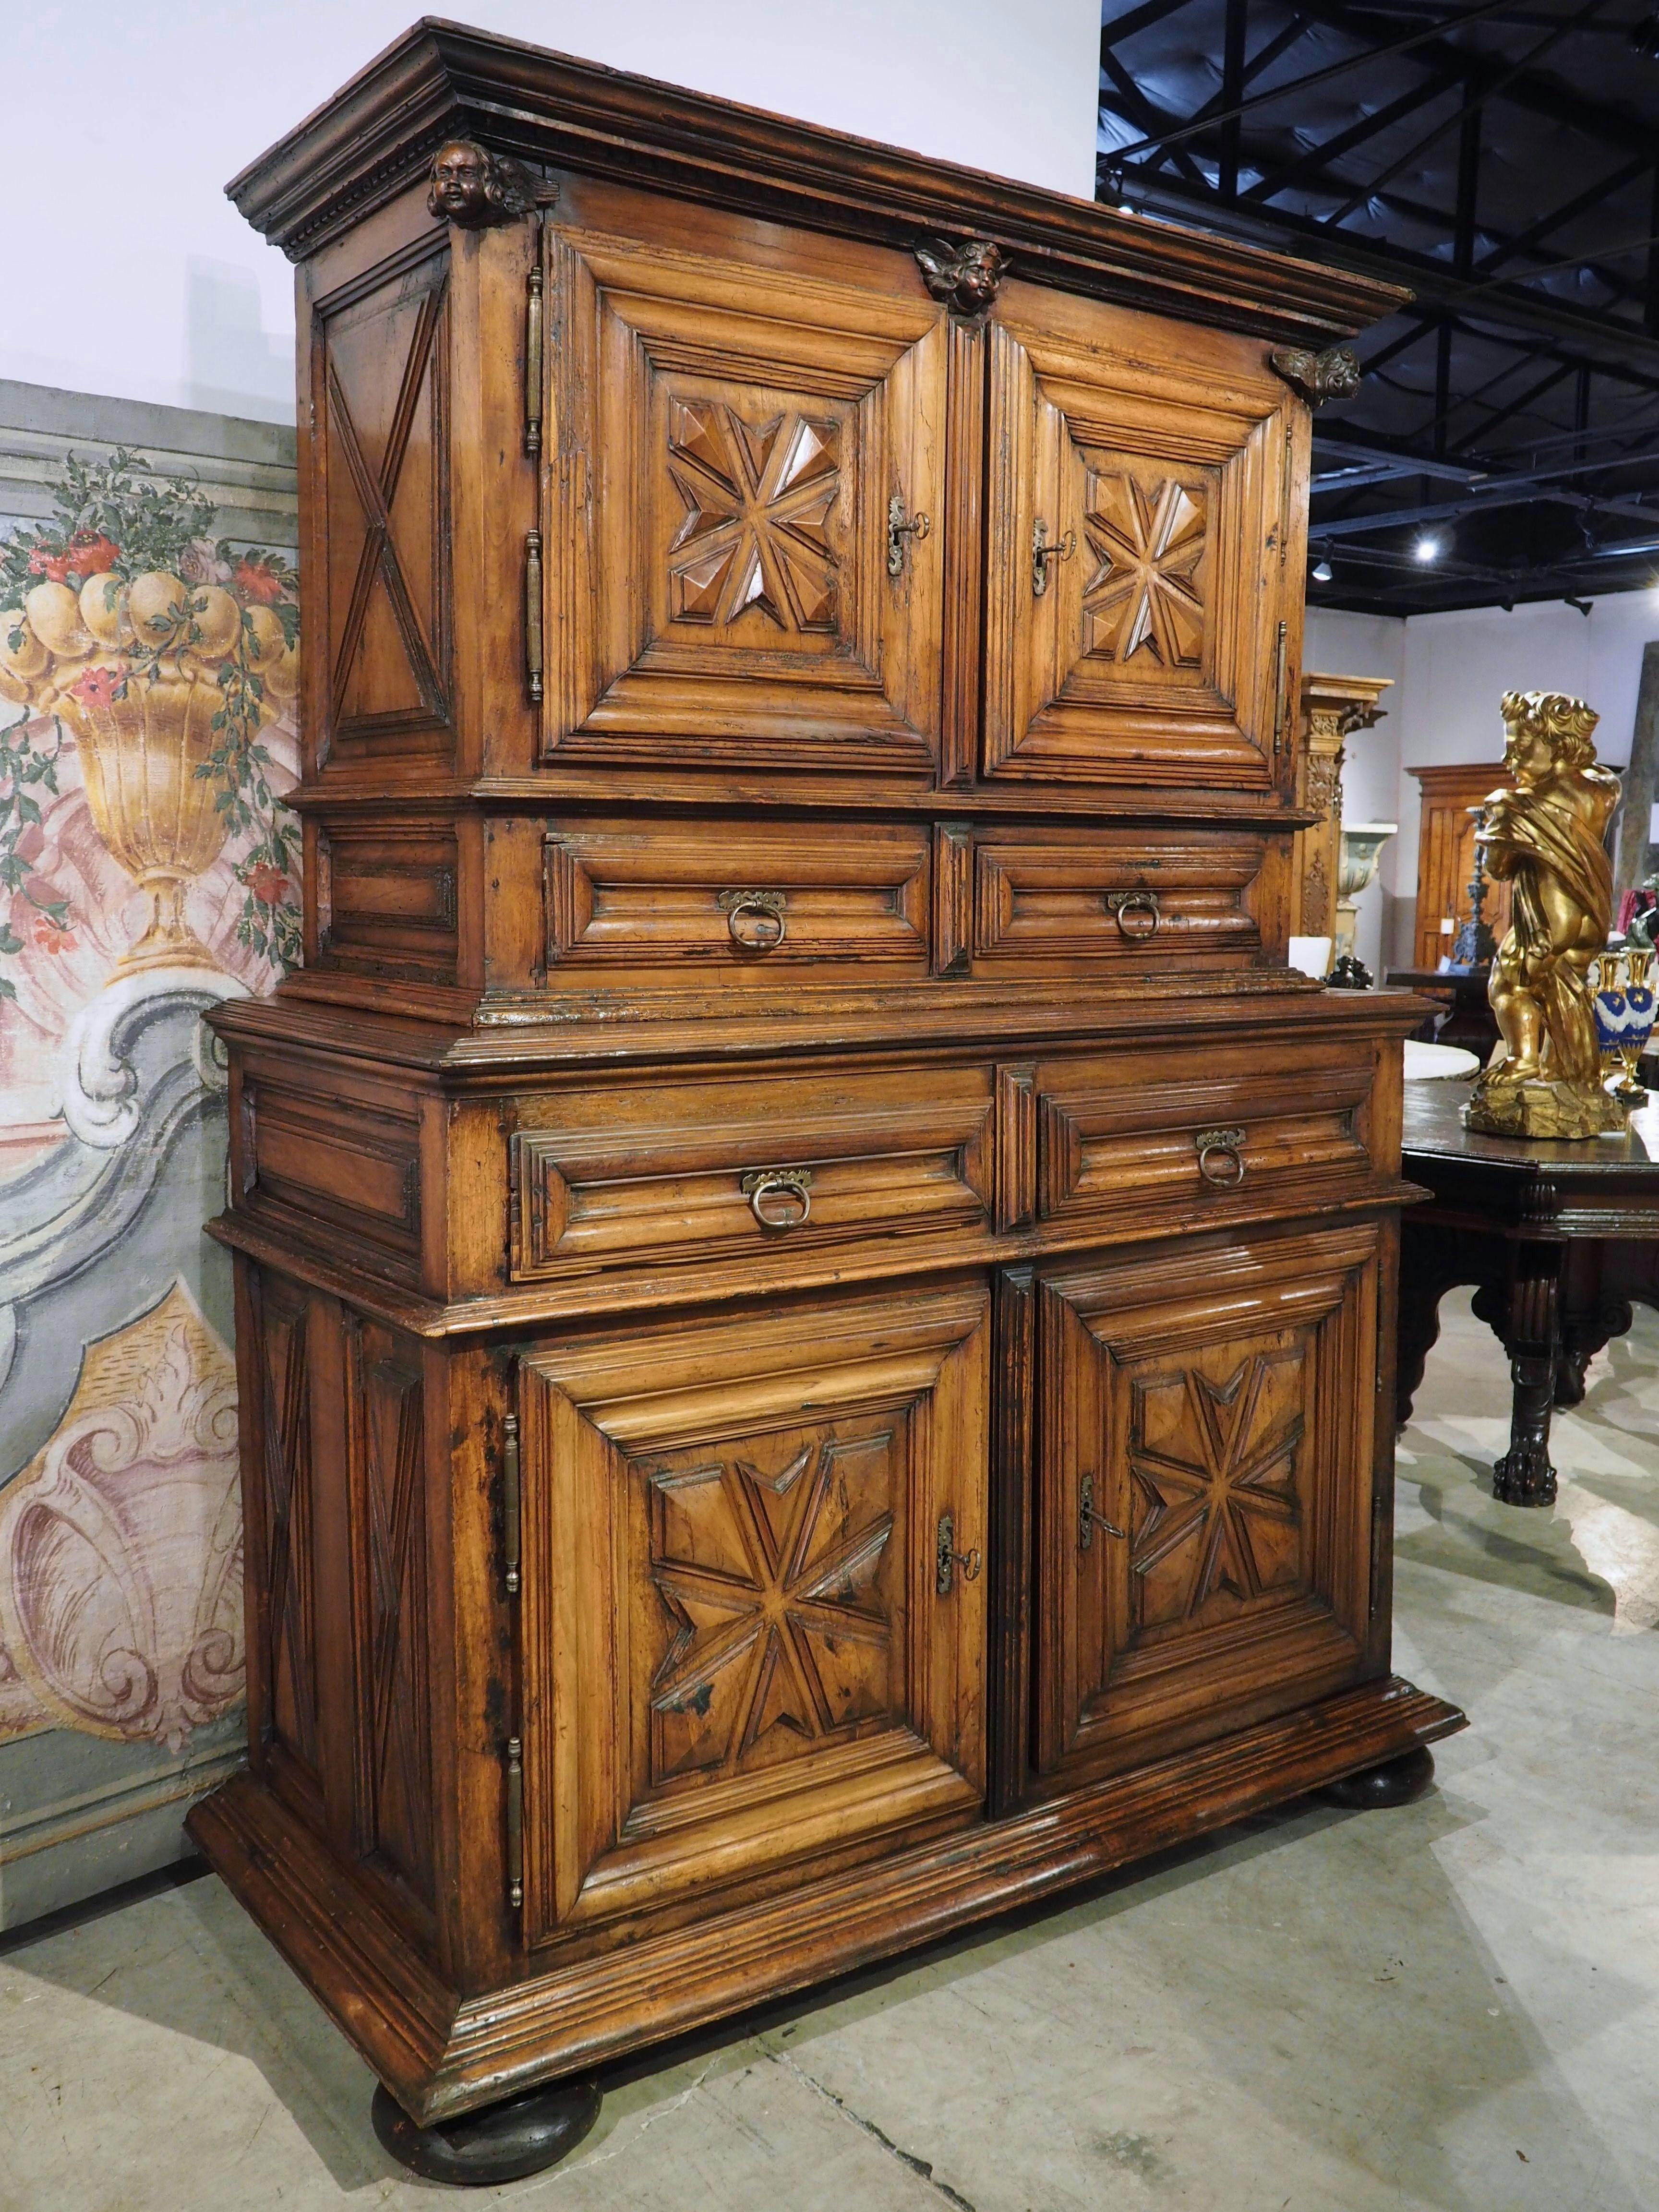 During the 1600’s, buffet deux corps were preferred pieces of furniture in French homes. These two-bodied cabinets allowed for storage of fine serving pieces and linens in kitchens or dining rooms.

Deux corps, such as ours, that were produced